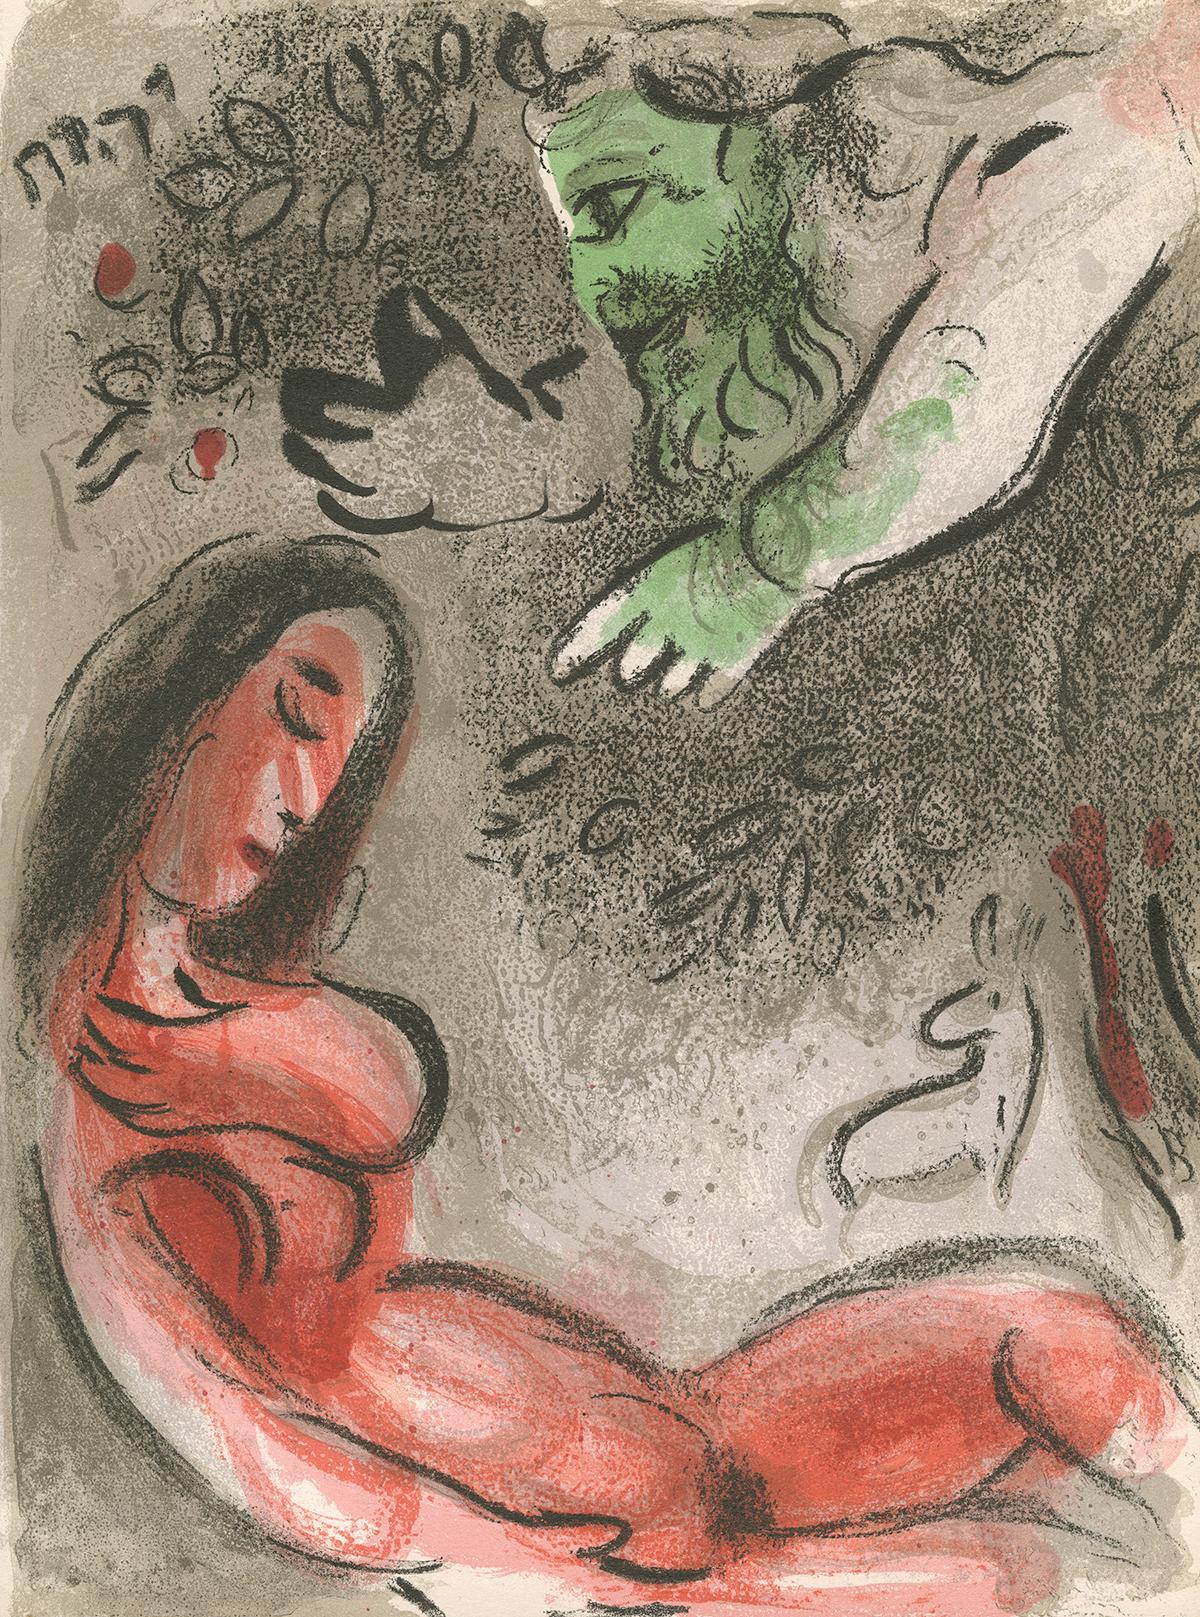 Marc Chagall Figurative Print - 20th century color lithograph nude figures red and green